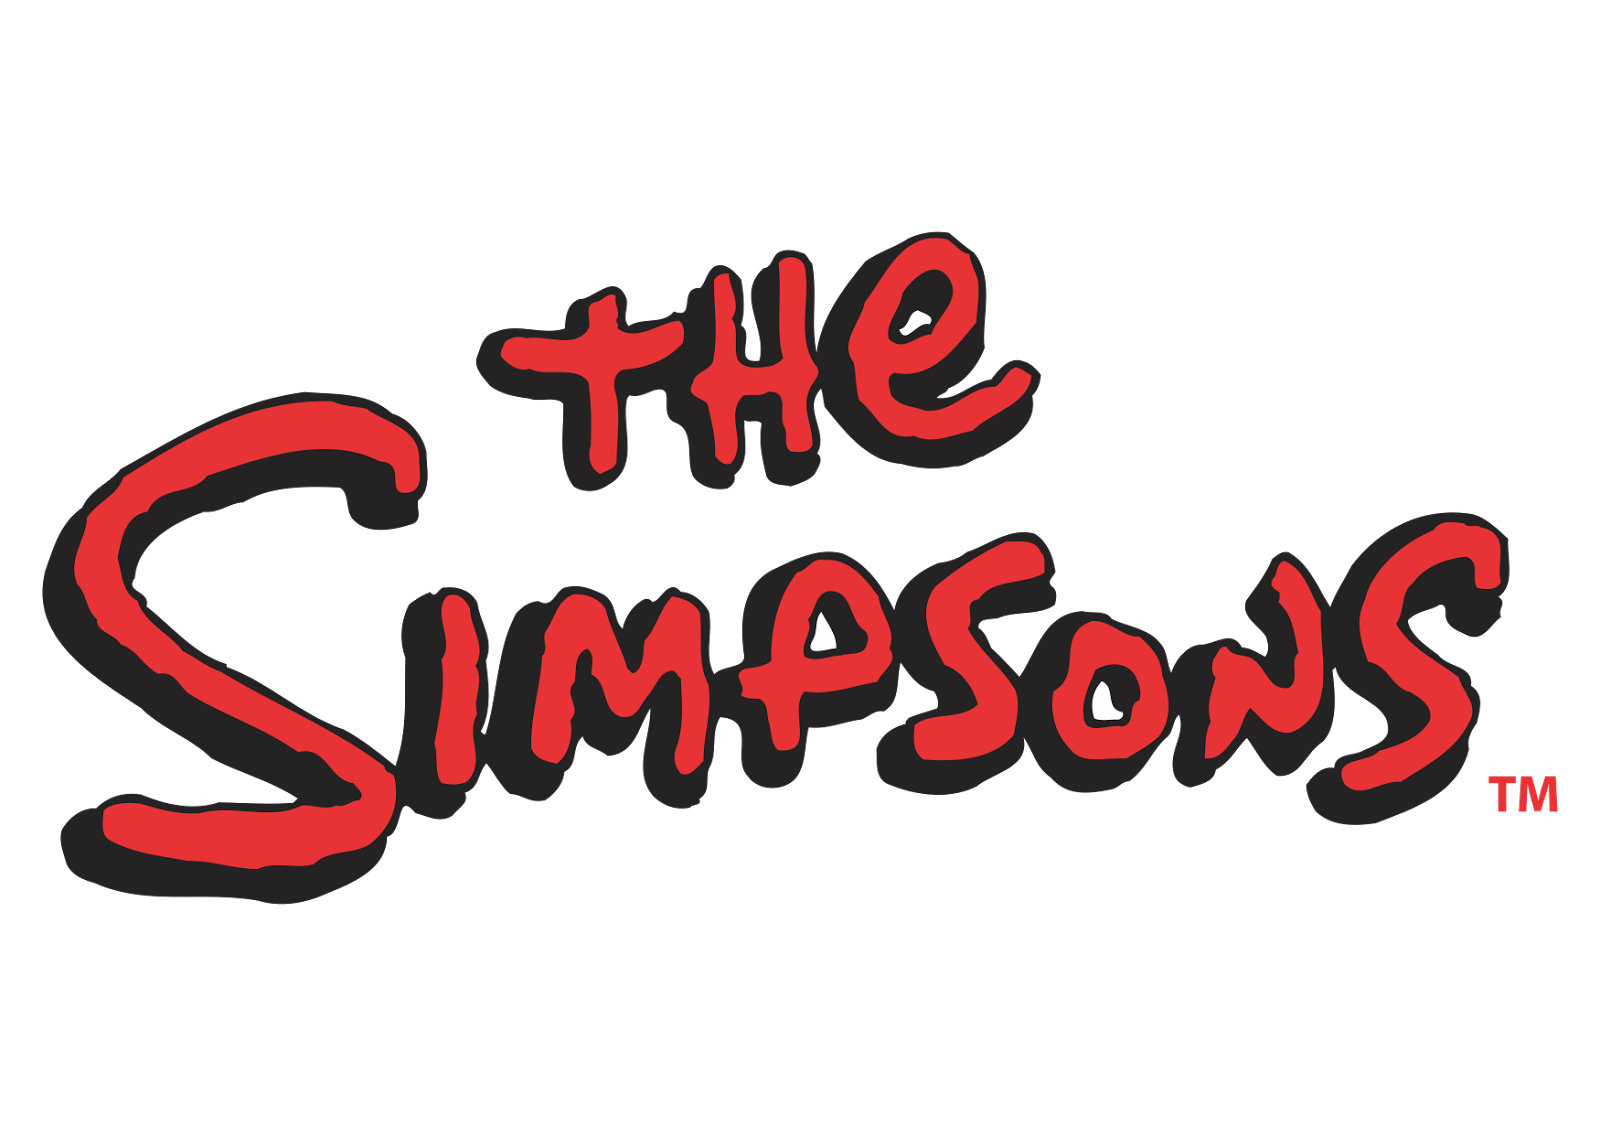 The-Simpsons-(design-part-2)-vector-logo.png